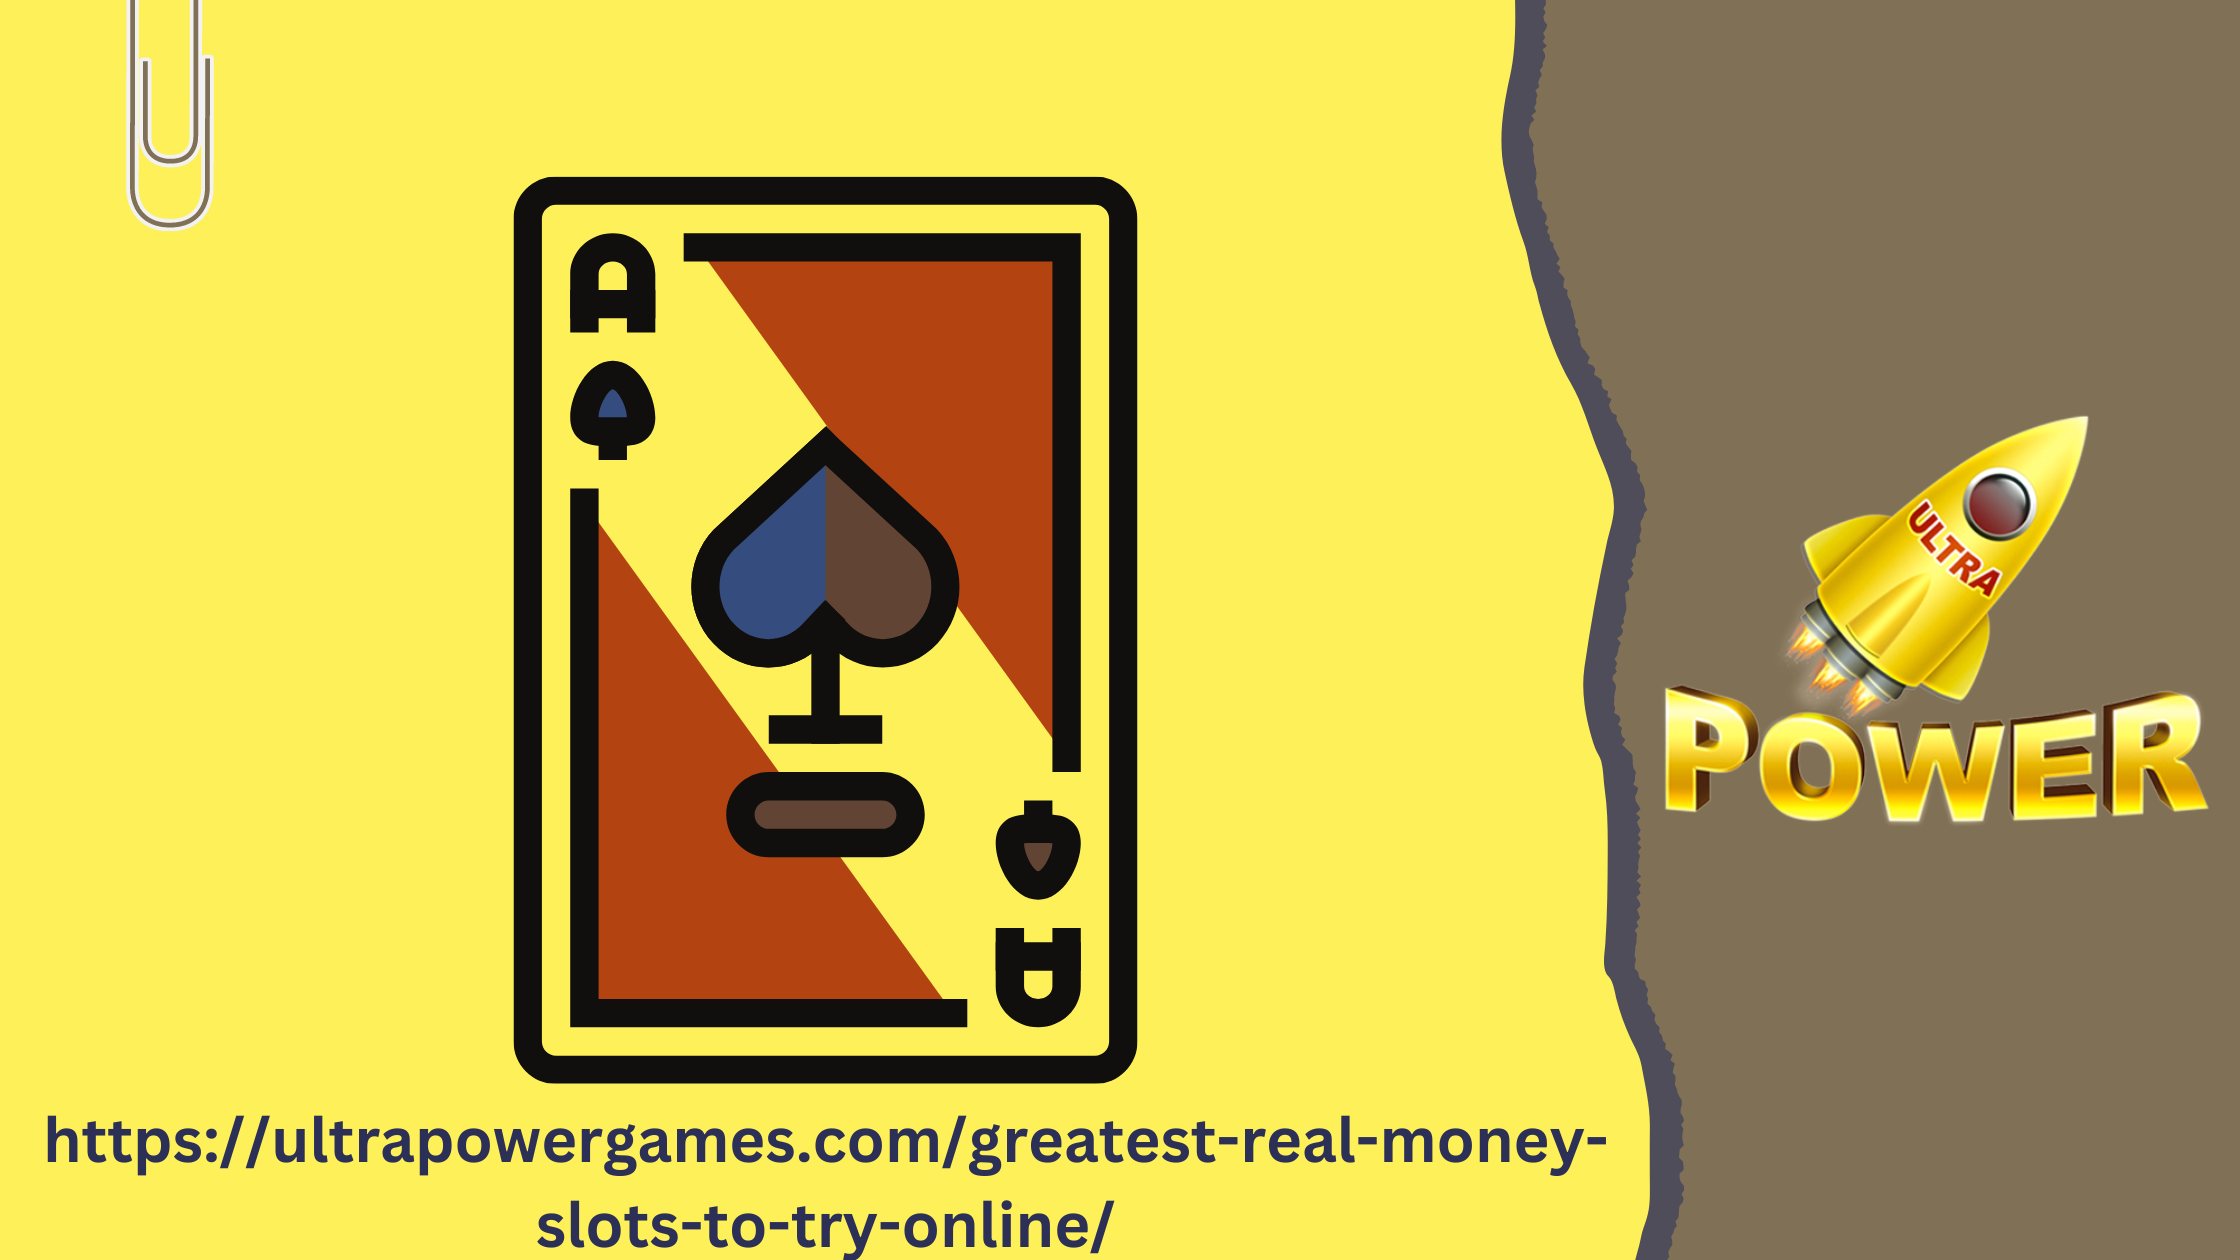 Real Money Slots vs. Free Play: Which One Should You Choose?